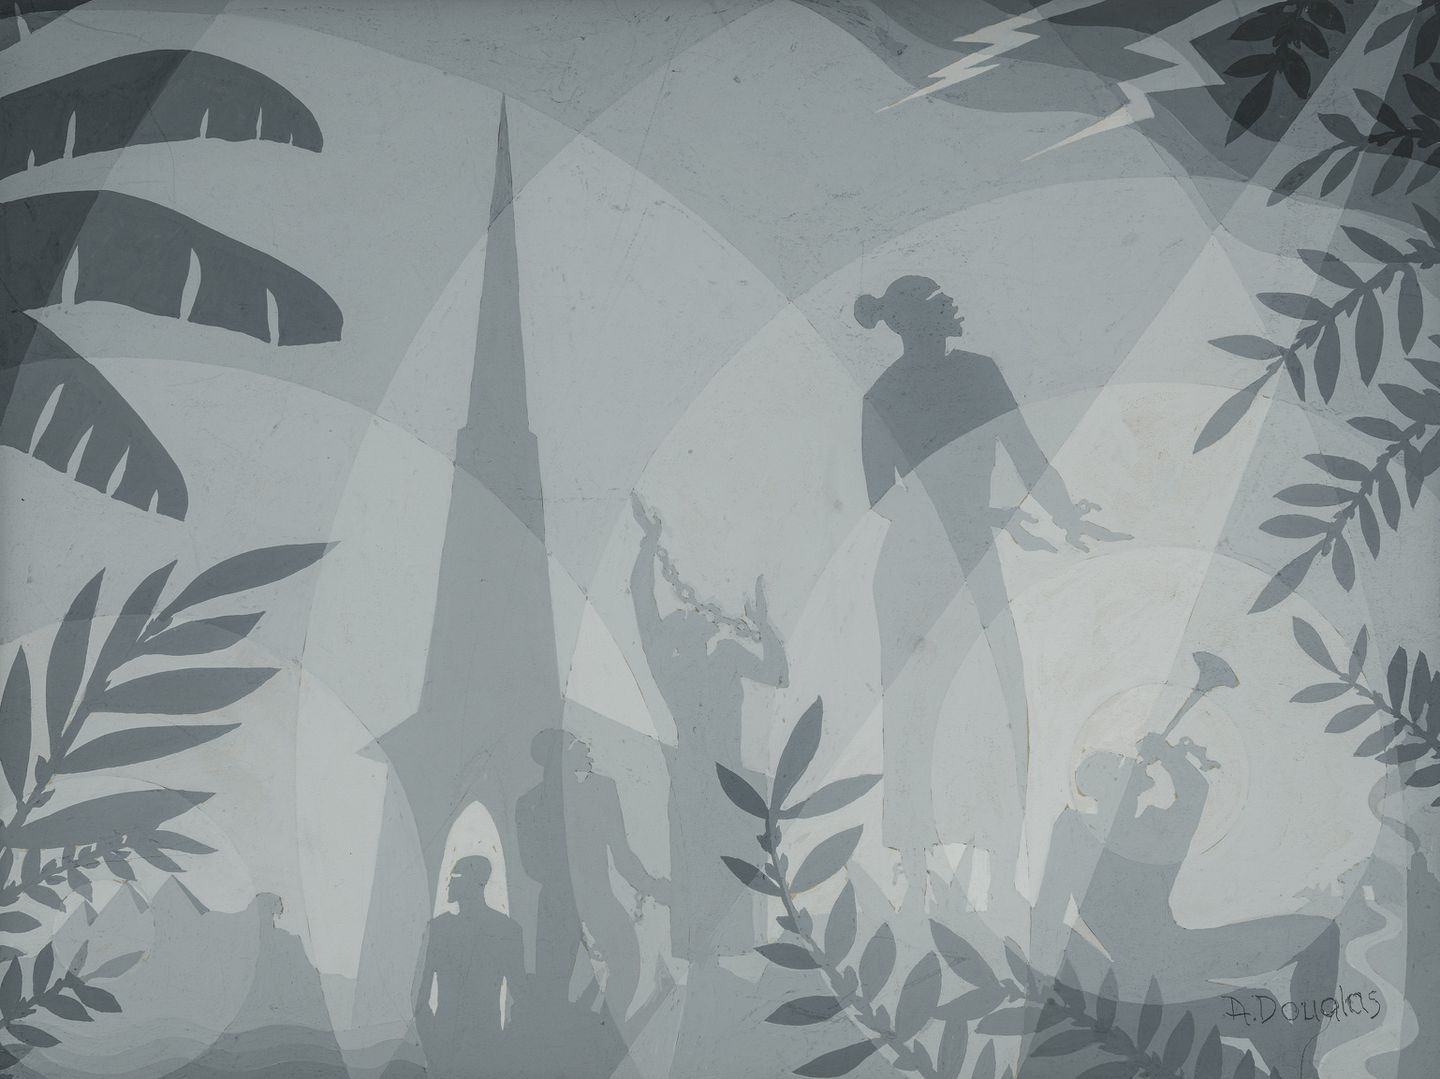 An untitled work by Aaron Douglas, 1930.THE JOHN AXELROD COLLECTION—FRANK B. BEMIS FUND, CHARLES H. BAYLEY FUND, AND THE HERITAGE FUND FOR A DIVERSE COLLECTION, © AARON DOUGLAS / ARTISTS RIGHTS SOCIETY (ARS), NEW YORK, PHOTOGRAPH © MUSEUM OF FINE ARTS, BOSTON